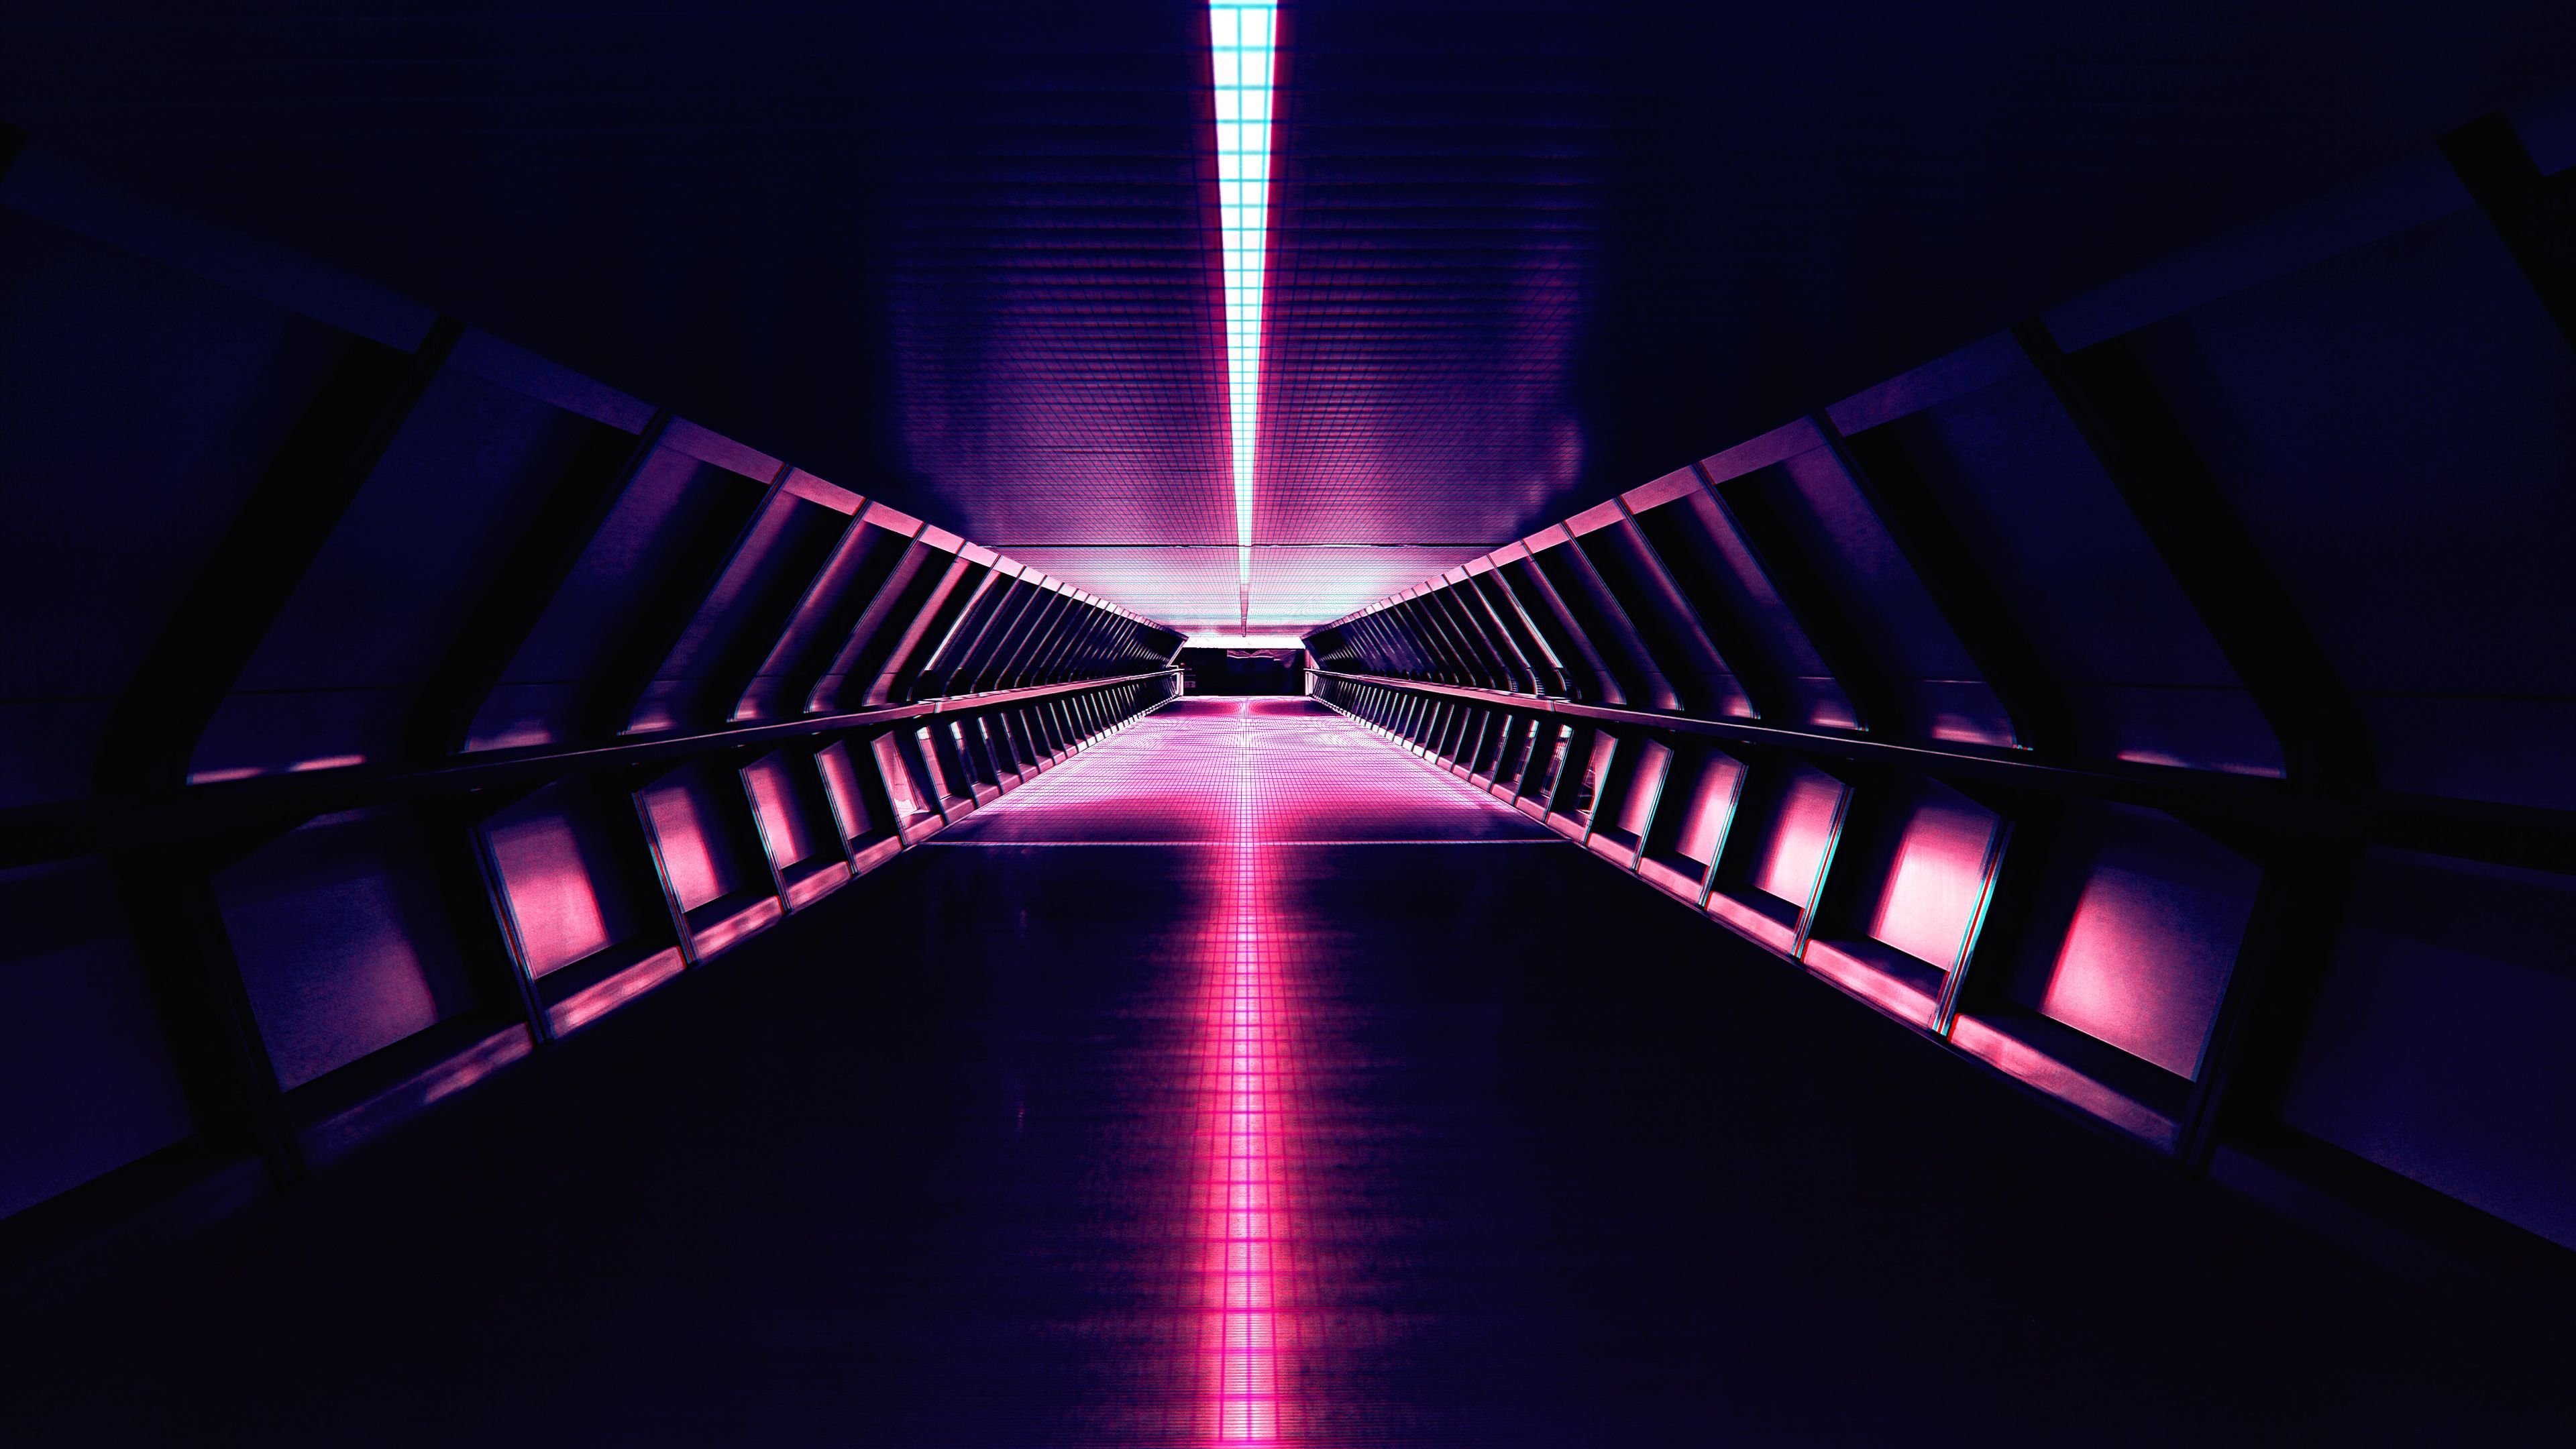 3840x2160 Hintergrundbild 3840x2160. Synthwave Aesthetic Corridor 4k, HD Photography, 4k Wallpaper, Image, Background, Photo and Picture